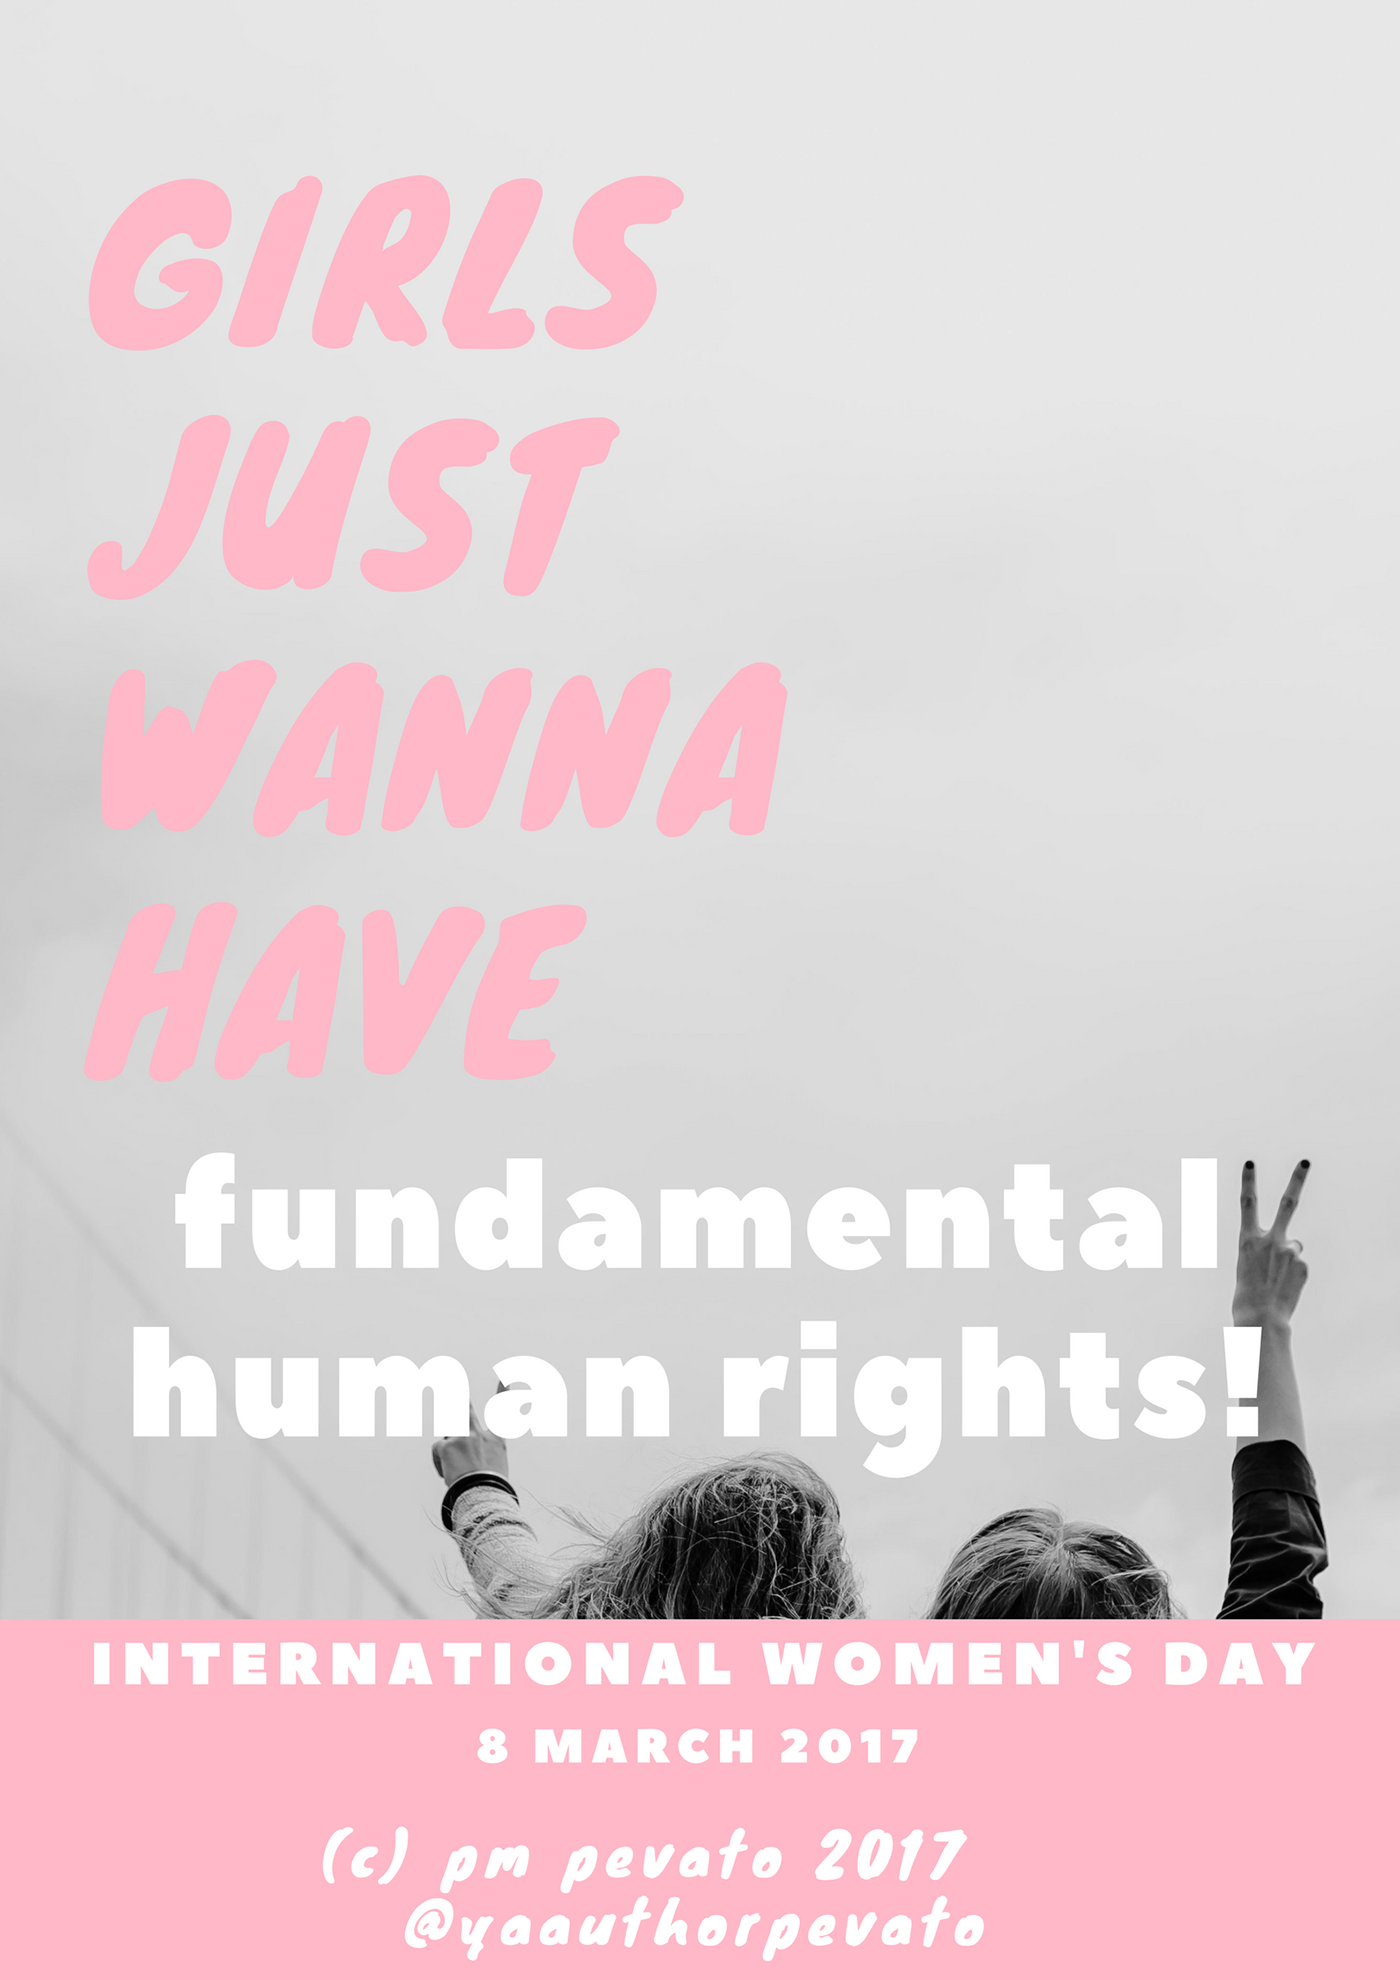 IWD International women Day equality nondiscrimination reproductive rights Human rights womens rights Womens March girls can code